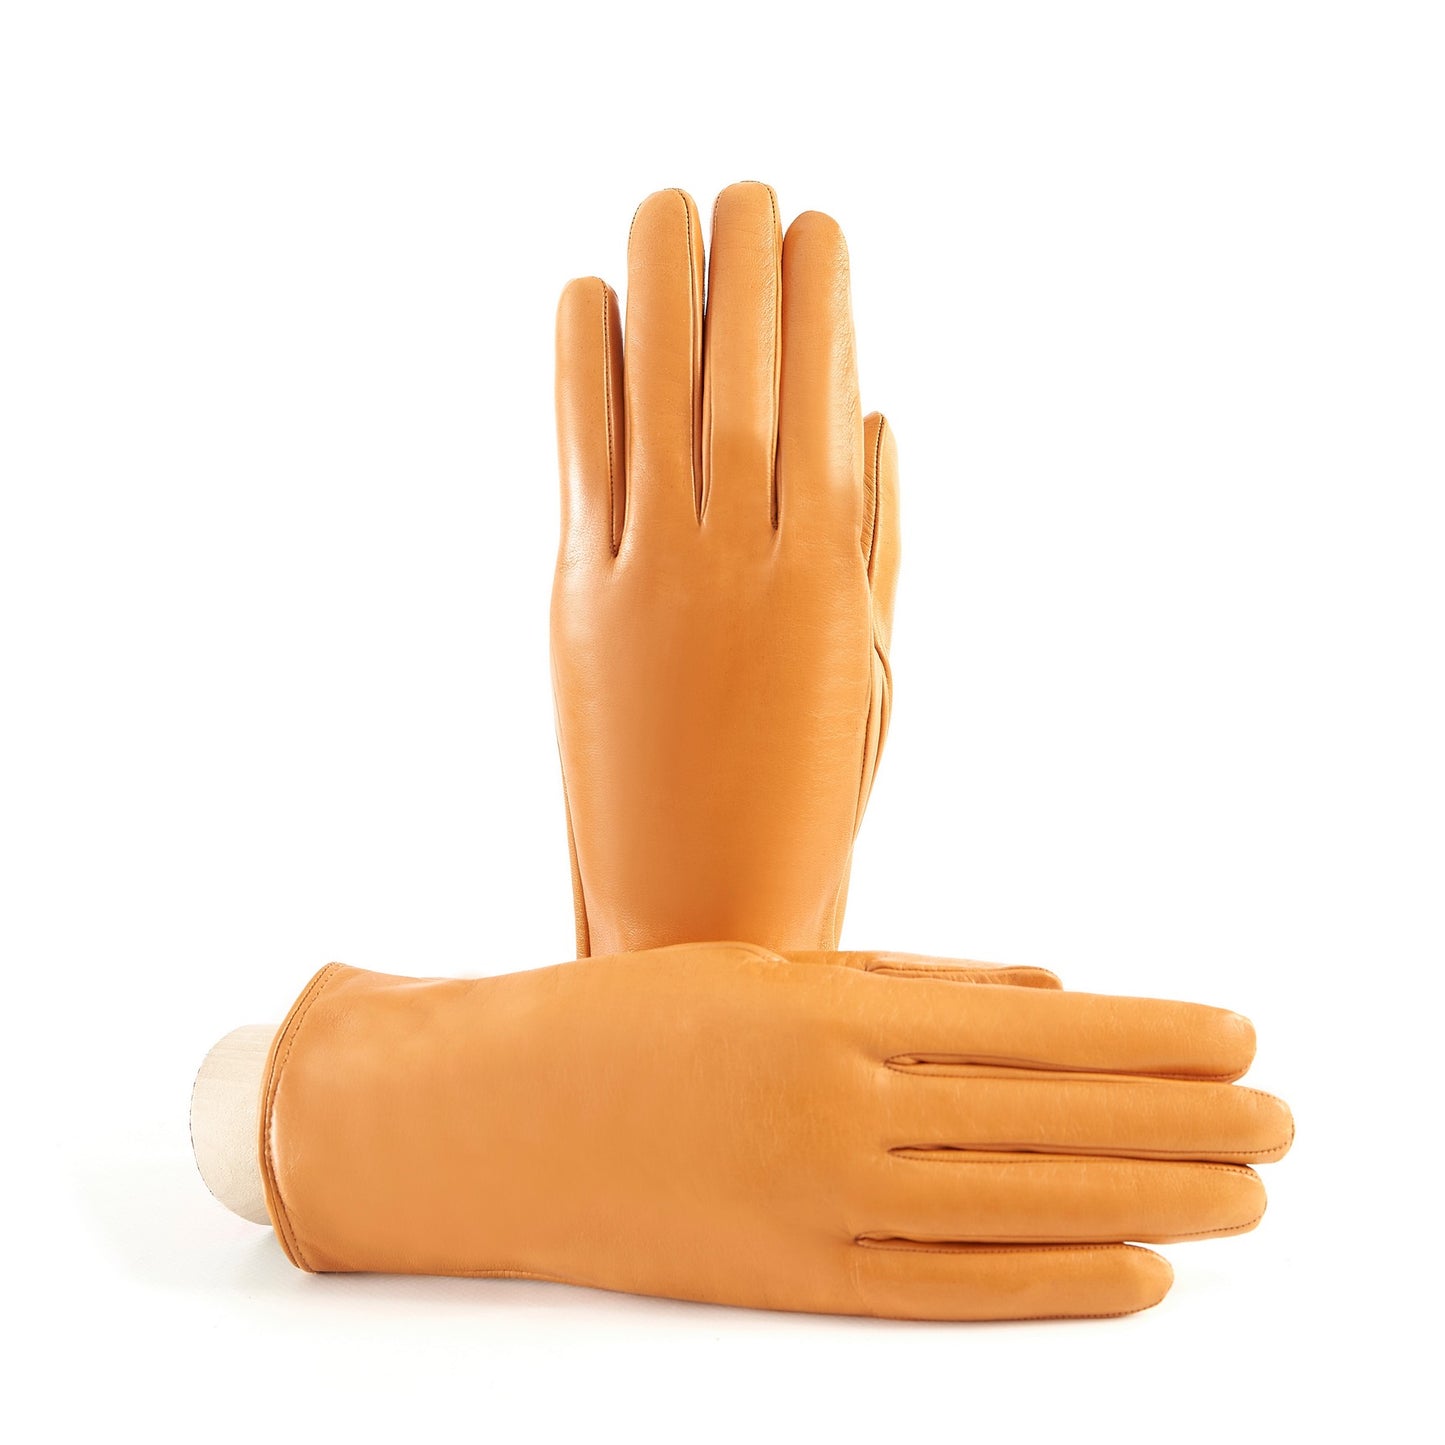 Women’s basic light orange soft nappa leather gloves with palm opening and mix cashmere lining